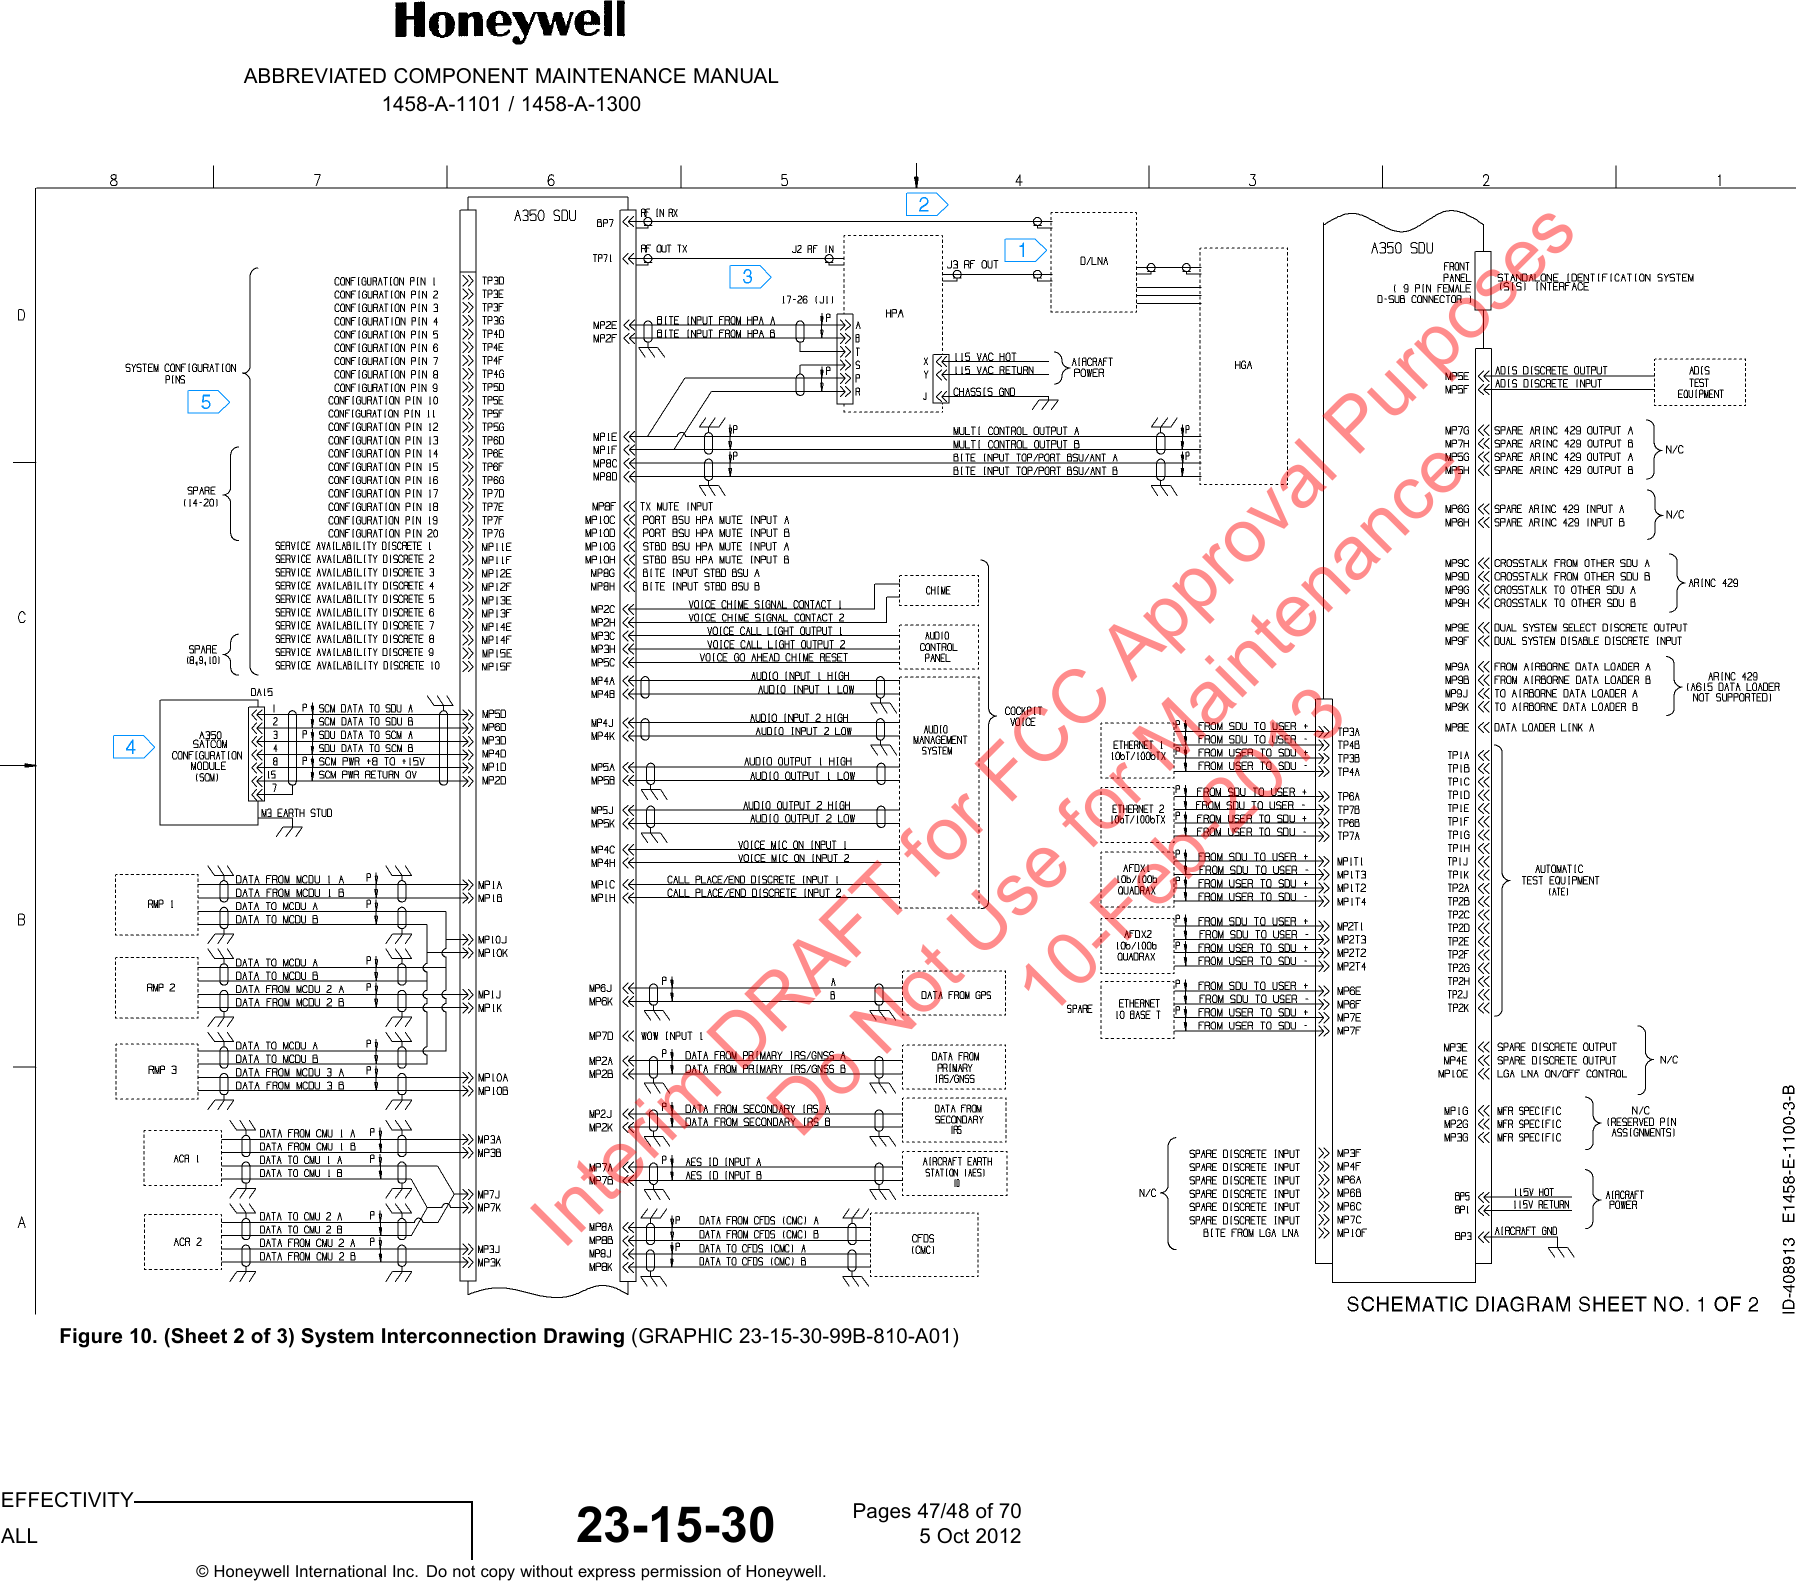 ABBREVIATED COMPONENT MAINTENANCE MANUAL1458-A-1101 / 1458-A-1300Figure 10. (Sheet 2 of 3) System Interconnection Drawing (GRAPHIC 23-15-30-99B-810-A01)EFFECTIVITYALL 23-15-30 Pages 47/48 of 705 Oct 2012© Honeywell International Inc. Do not copy without express permission of Honeywell.Interim DRAFT for FCC Approval Purposes Do Not Use for Maintenance 10-Feb-2013